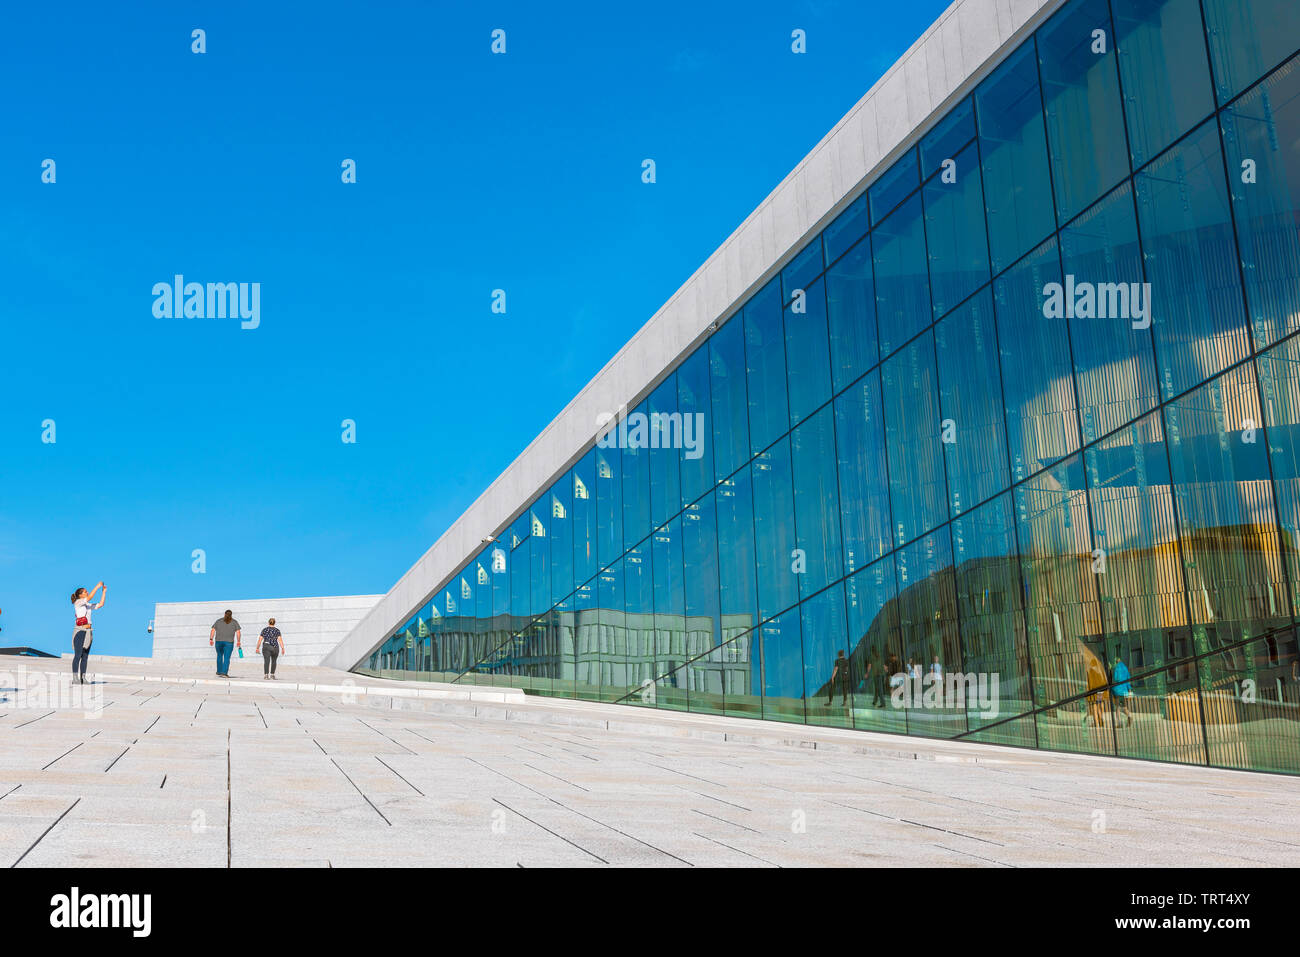 Oslo Opera House, view in summer of a tourist taking a photo on the vast access ramp leading to the roof of the Oslo Opera House, Norway. Stock Photo